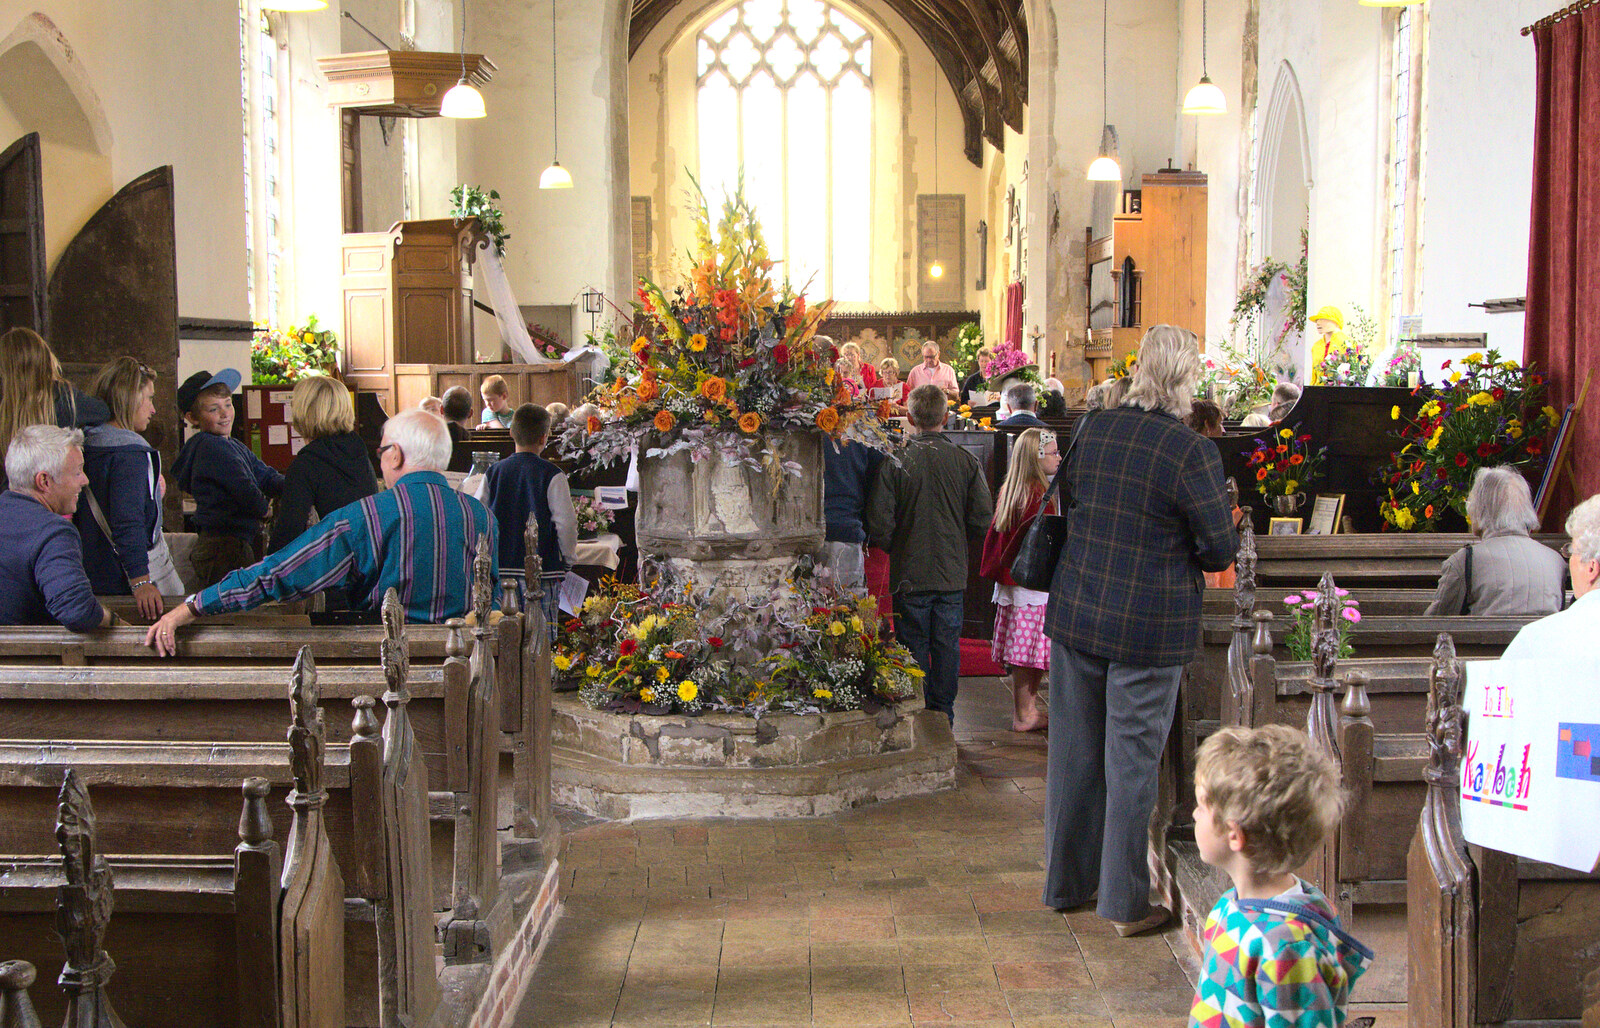 Impressive flower arrangement in the nave from The Oaksmere, and the Gislingham Flower Festival, Suffolk - 24th August 2014